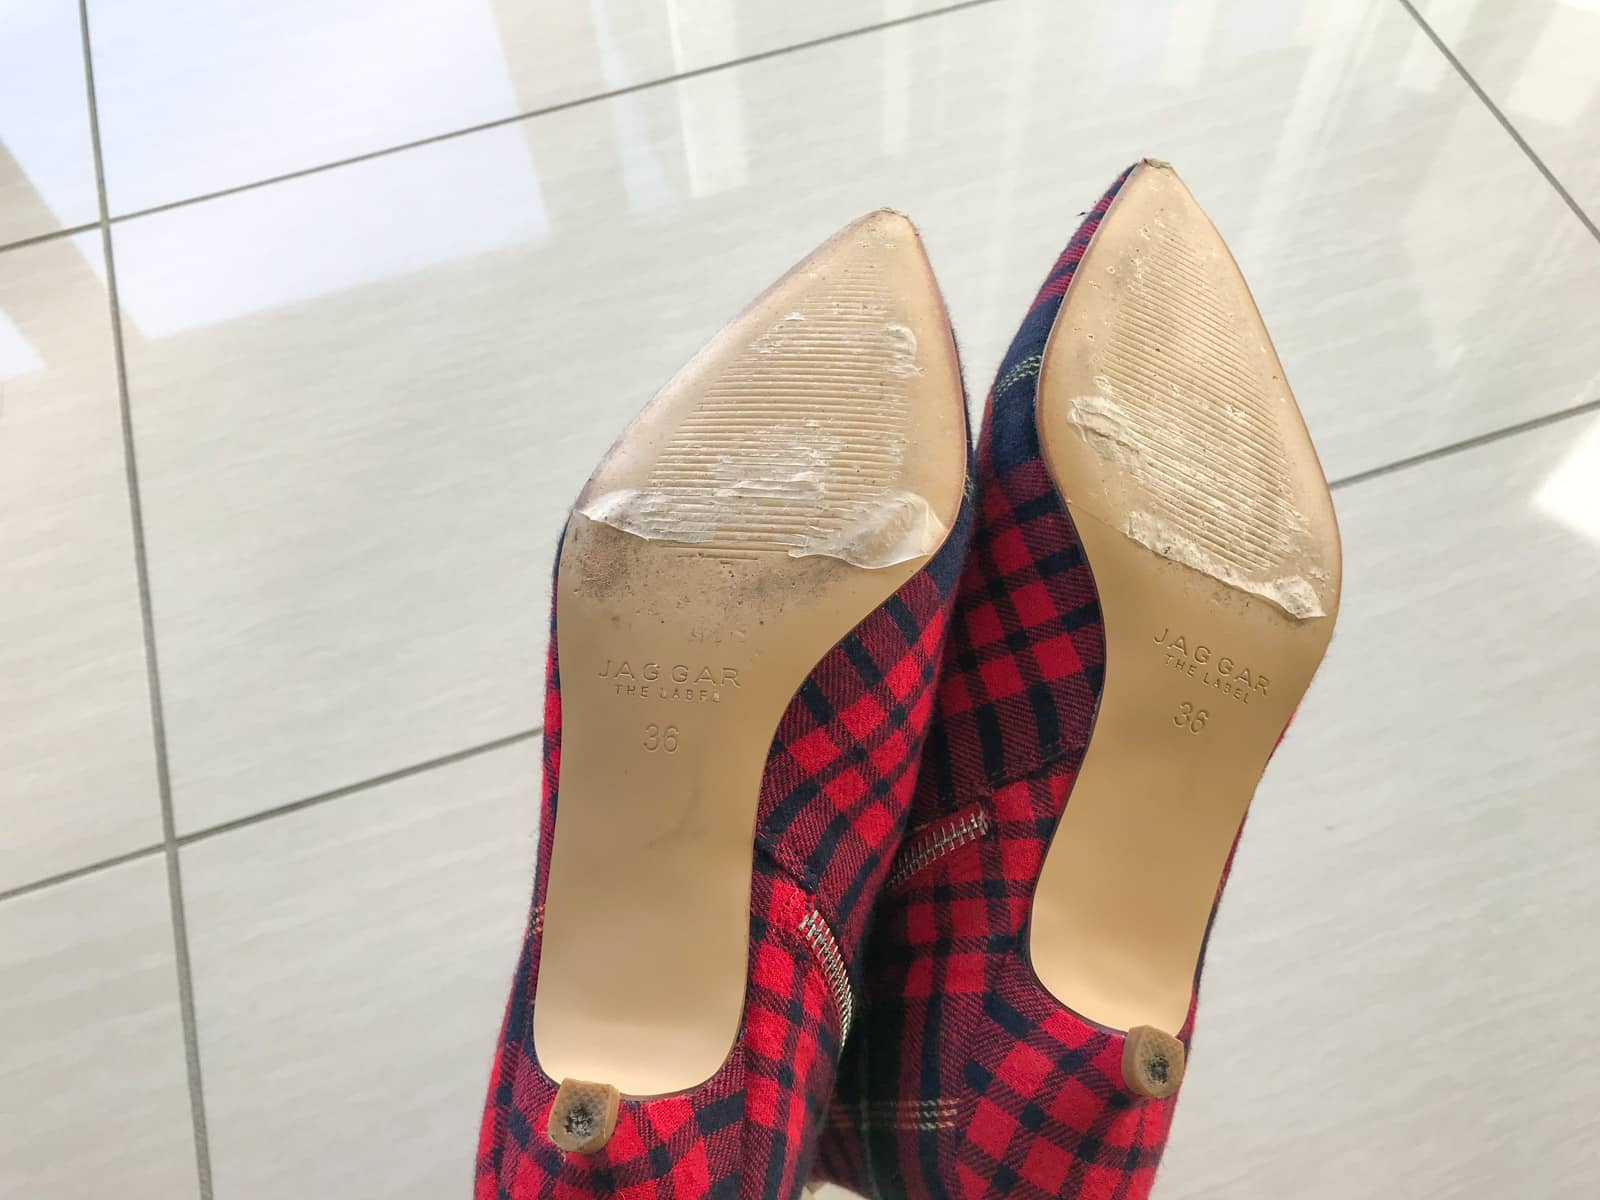 The bottom of a pair of red plaid pointed-toe shoes, showing some bad signs of wear and tear on the sole and heel.